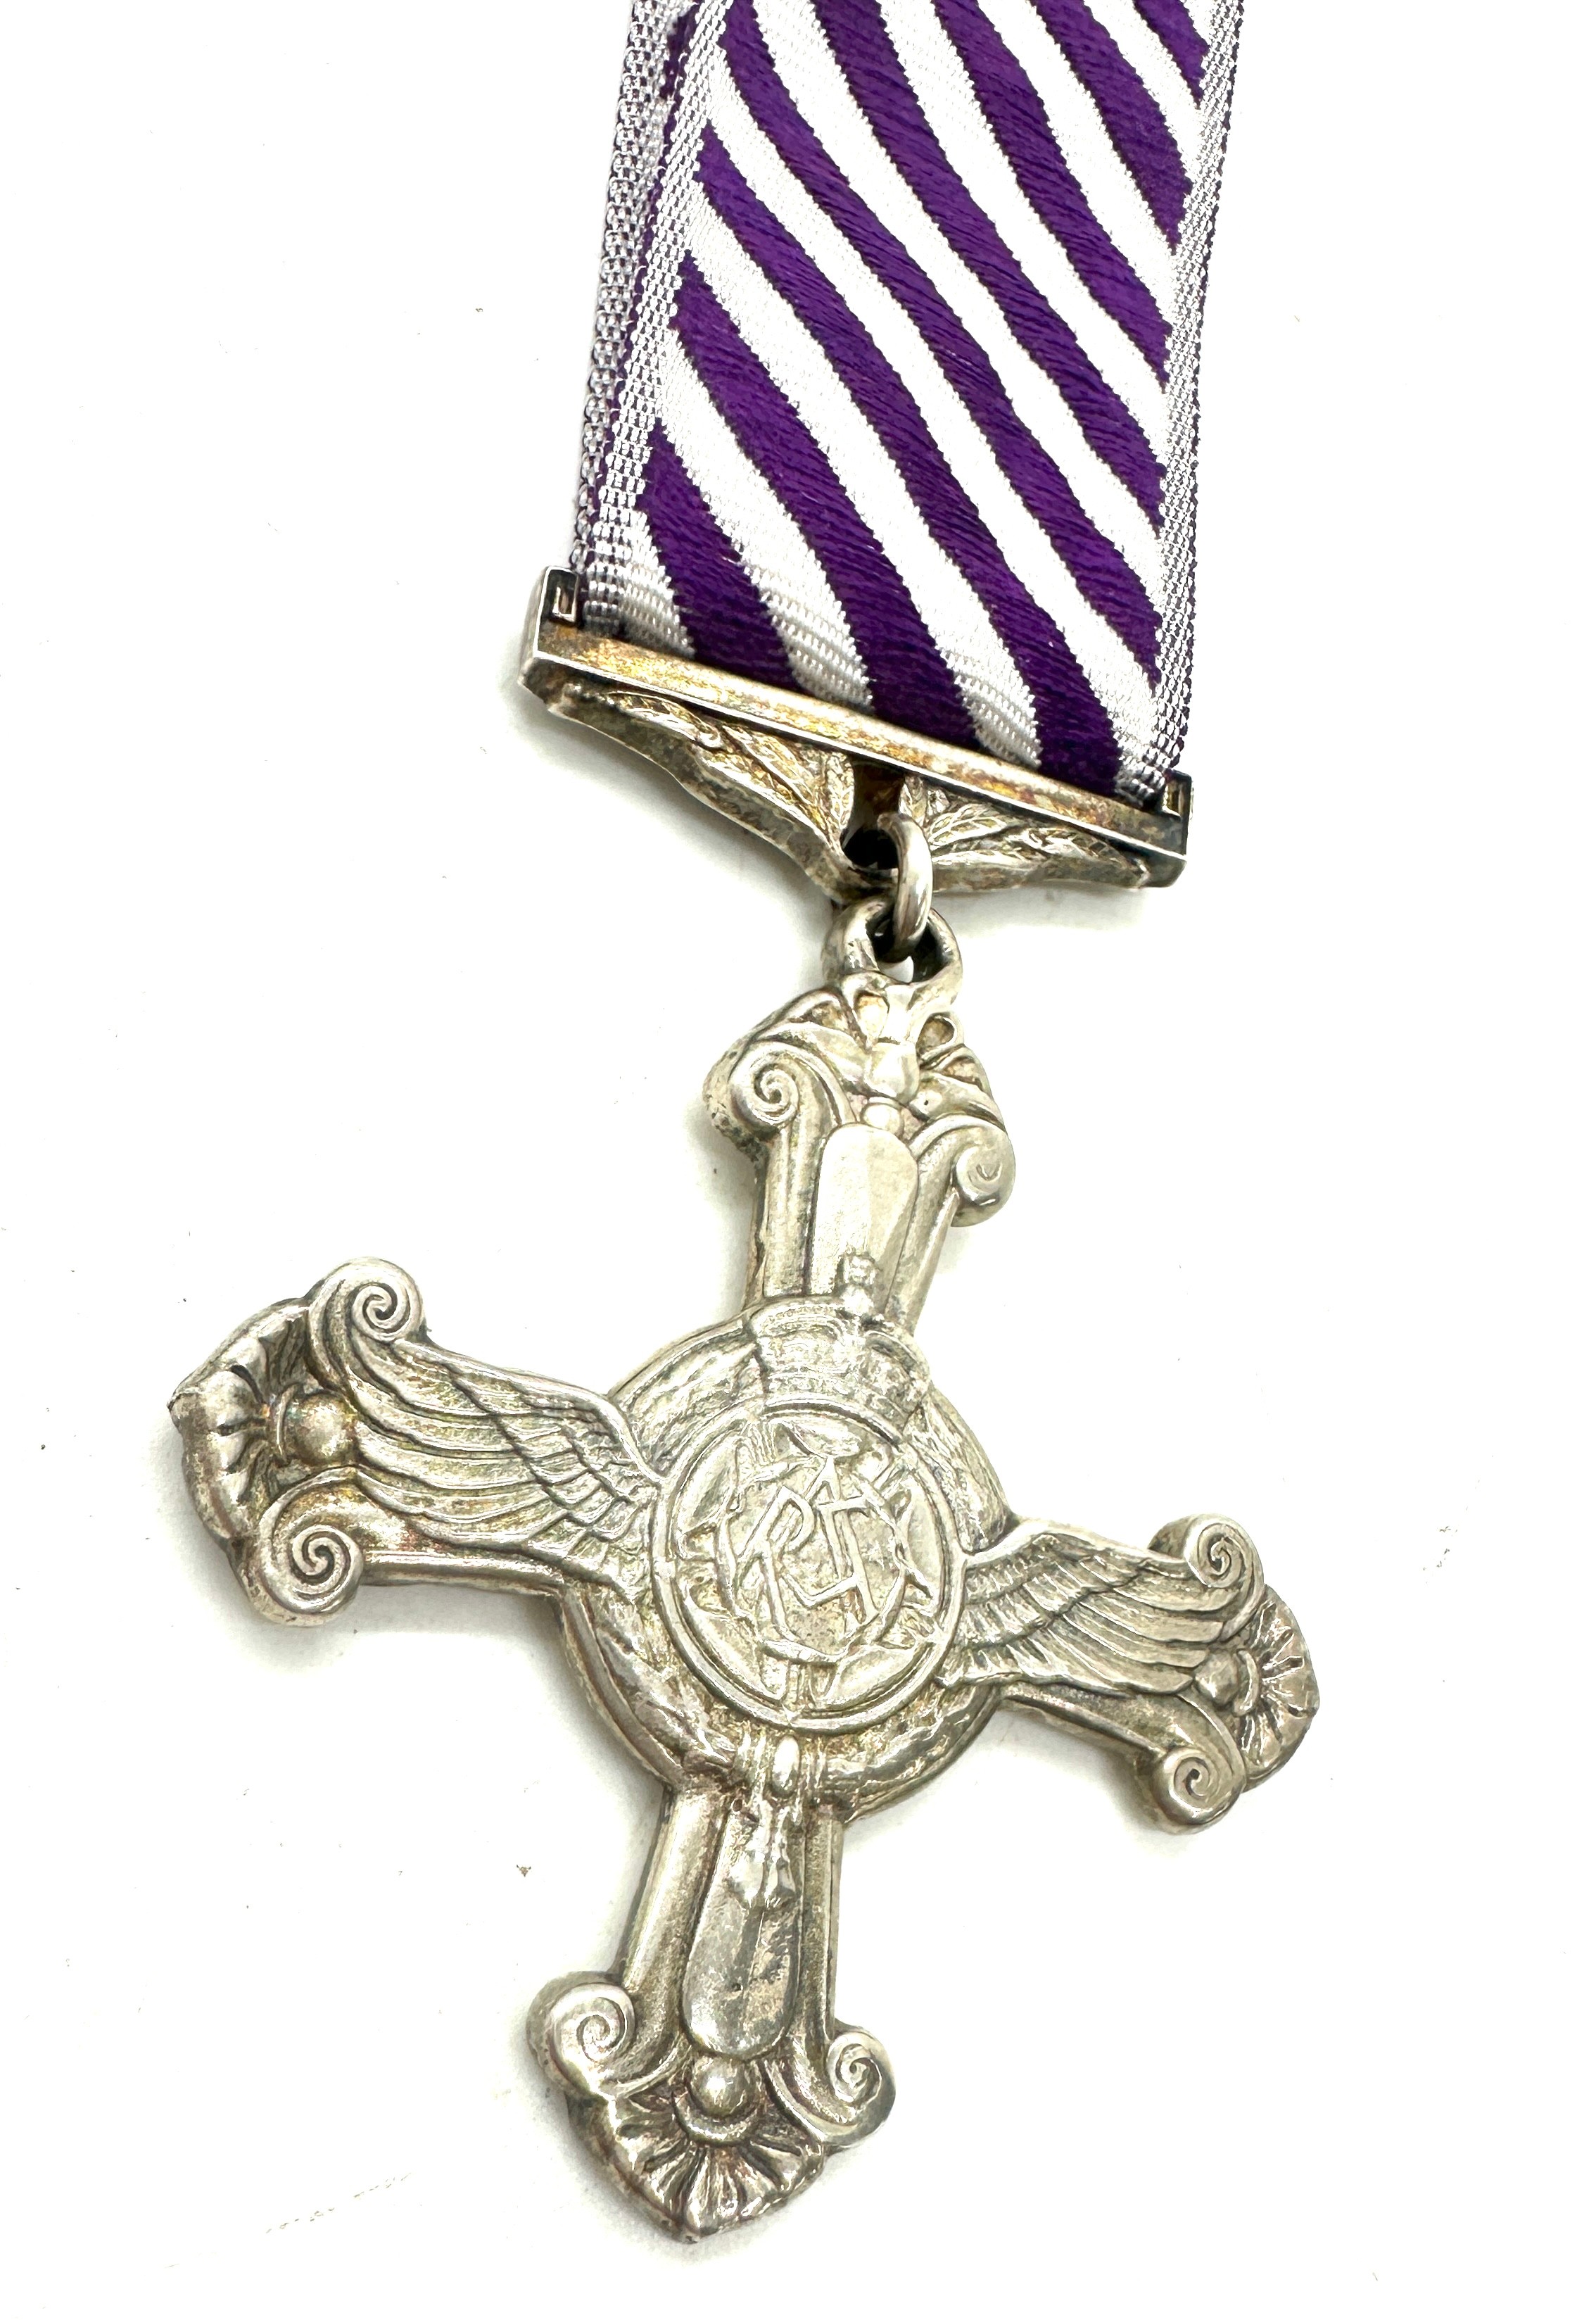 Replica of a 1918 Silver flying cross medal in original box - Image 3 of 4